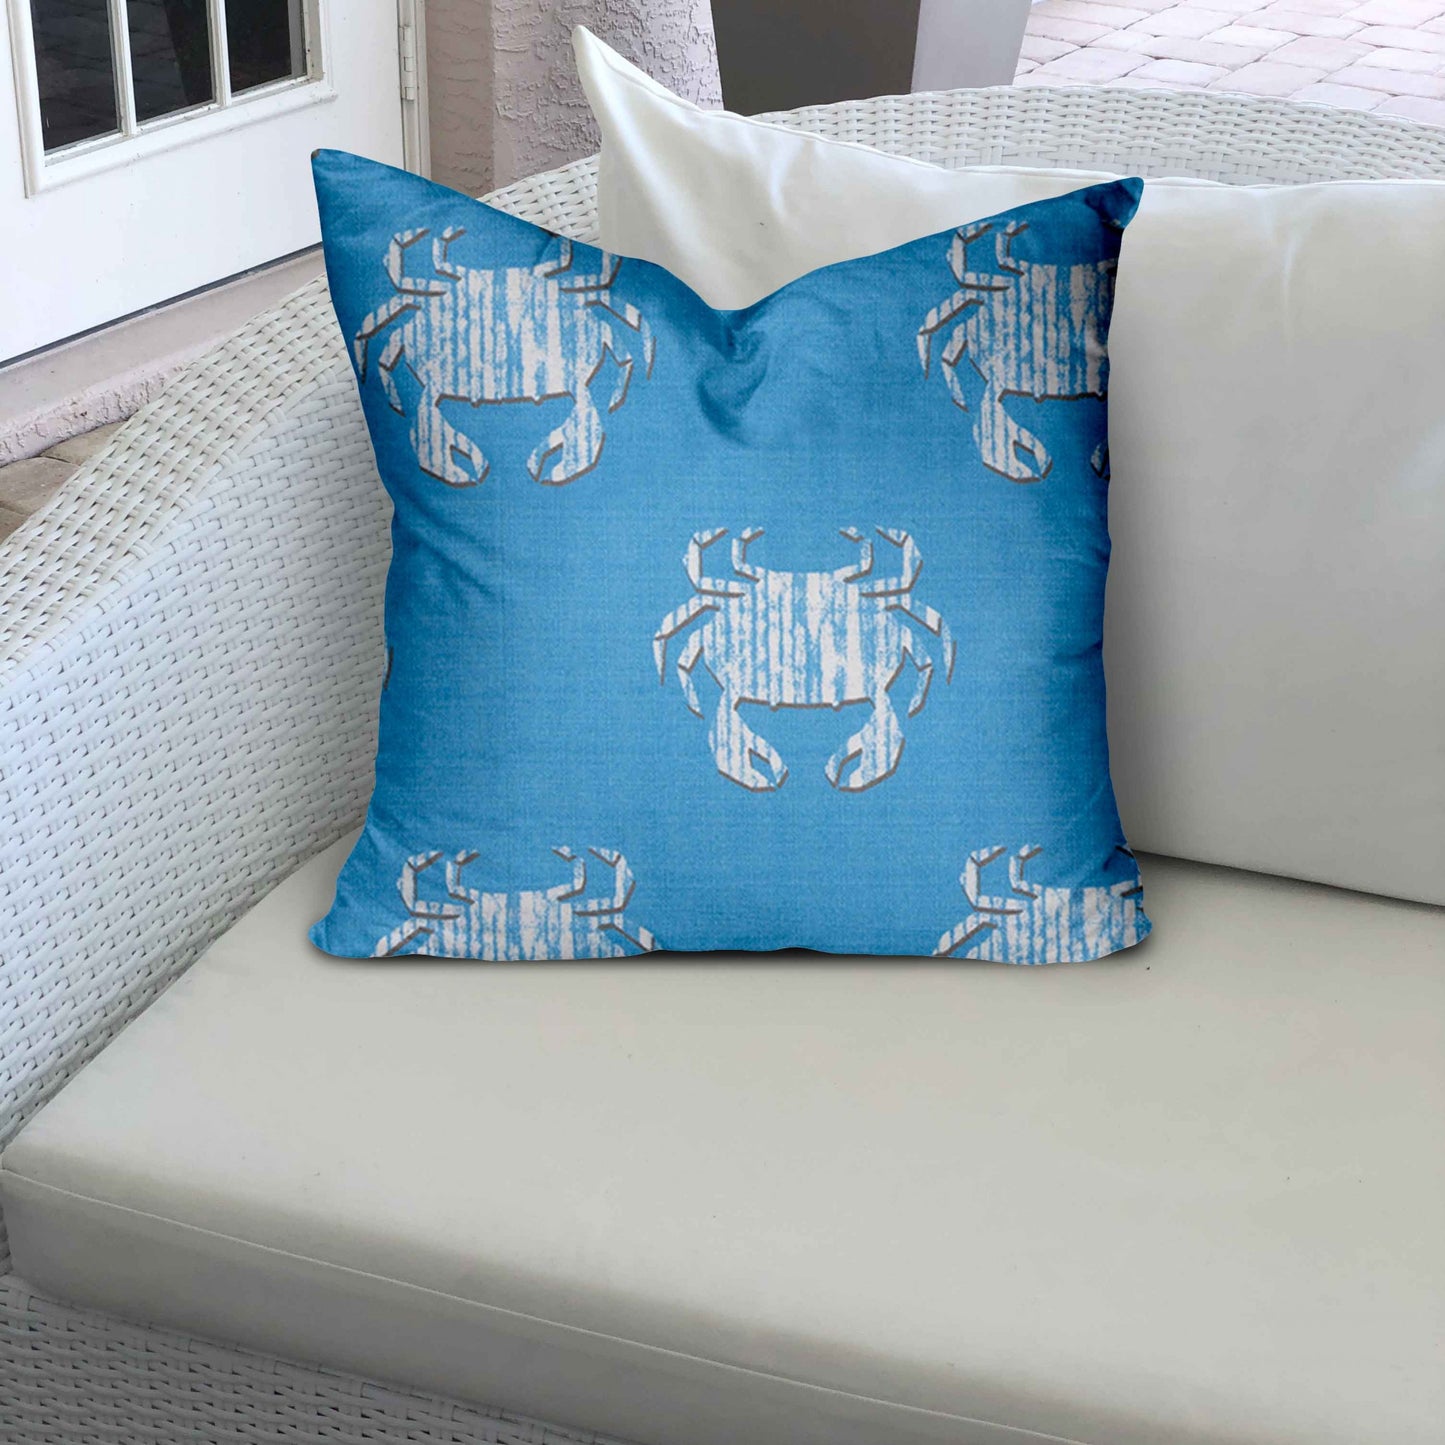 12" X 12" Blue And White Crab Enveloped Throw Indoor Outdoor Pillow Cover